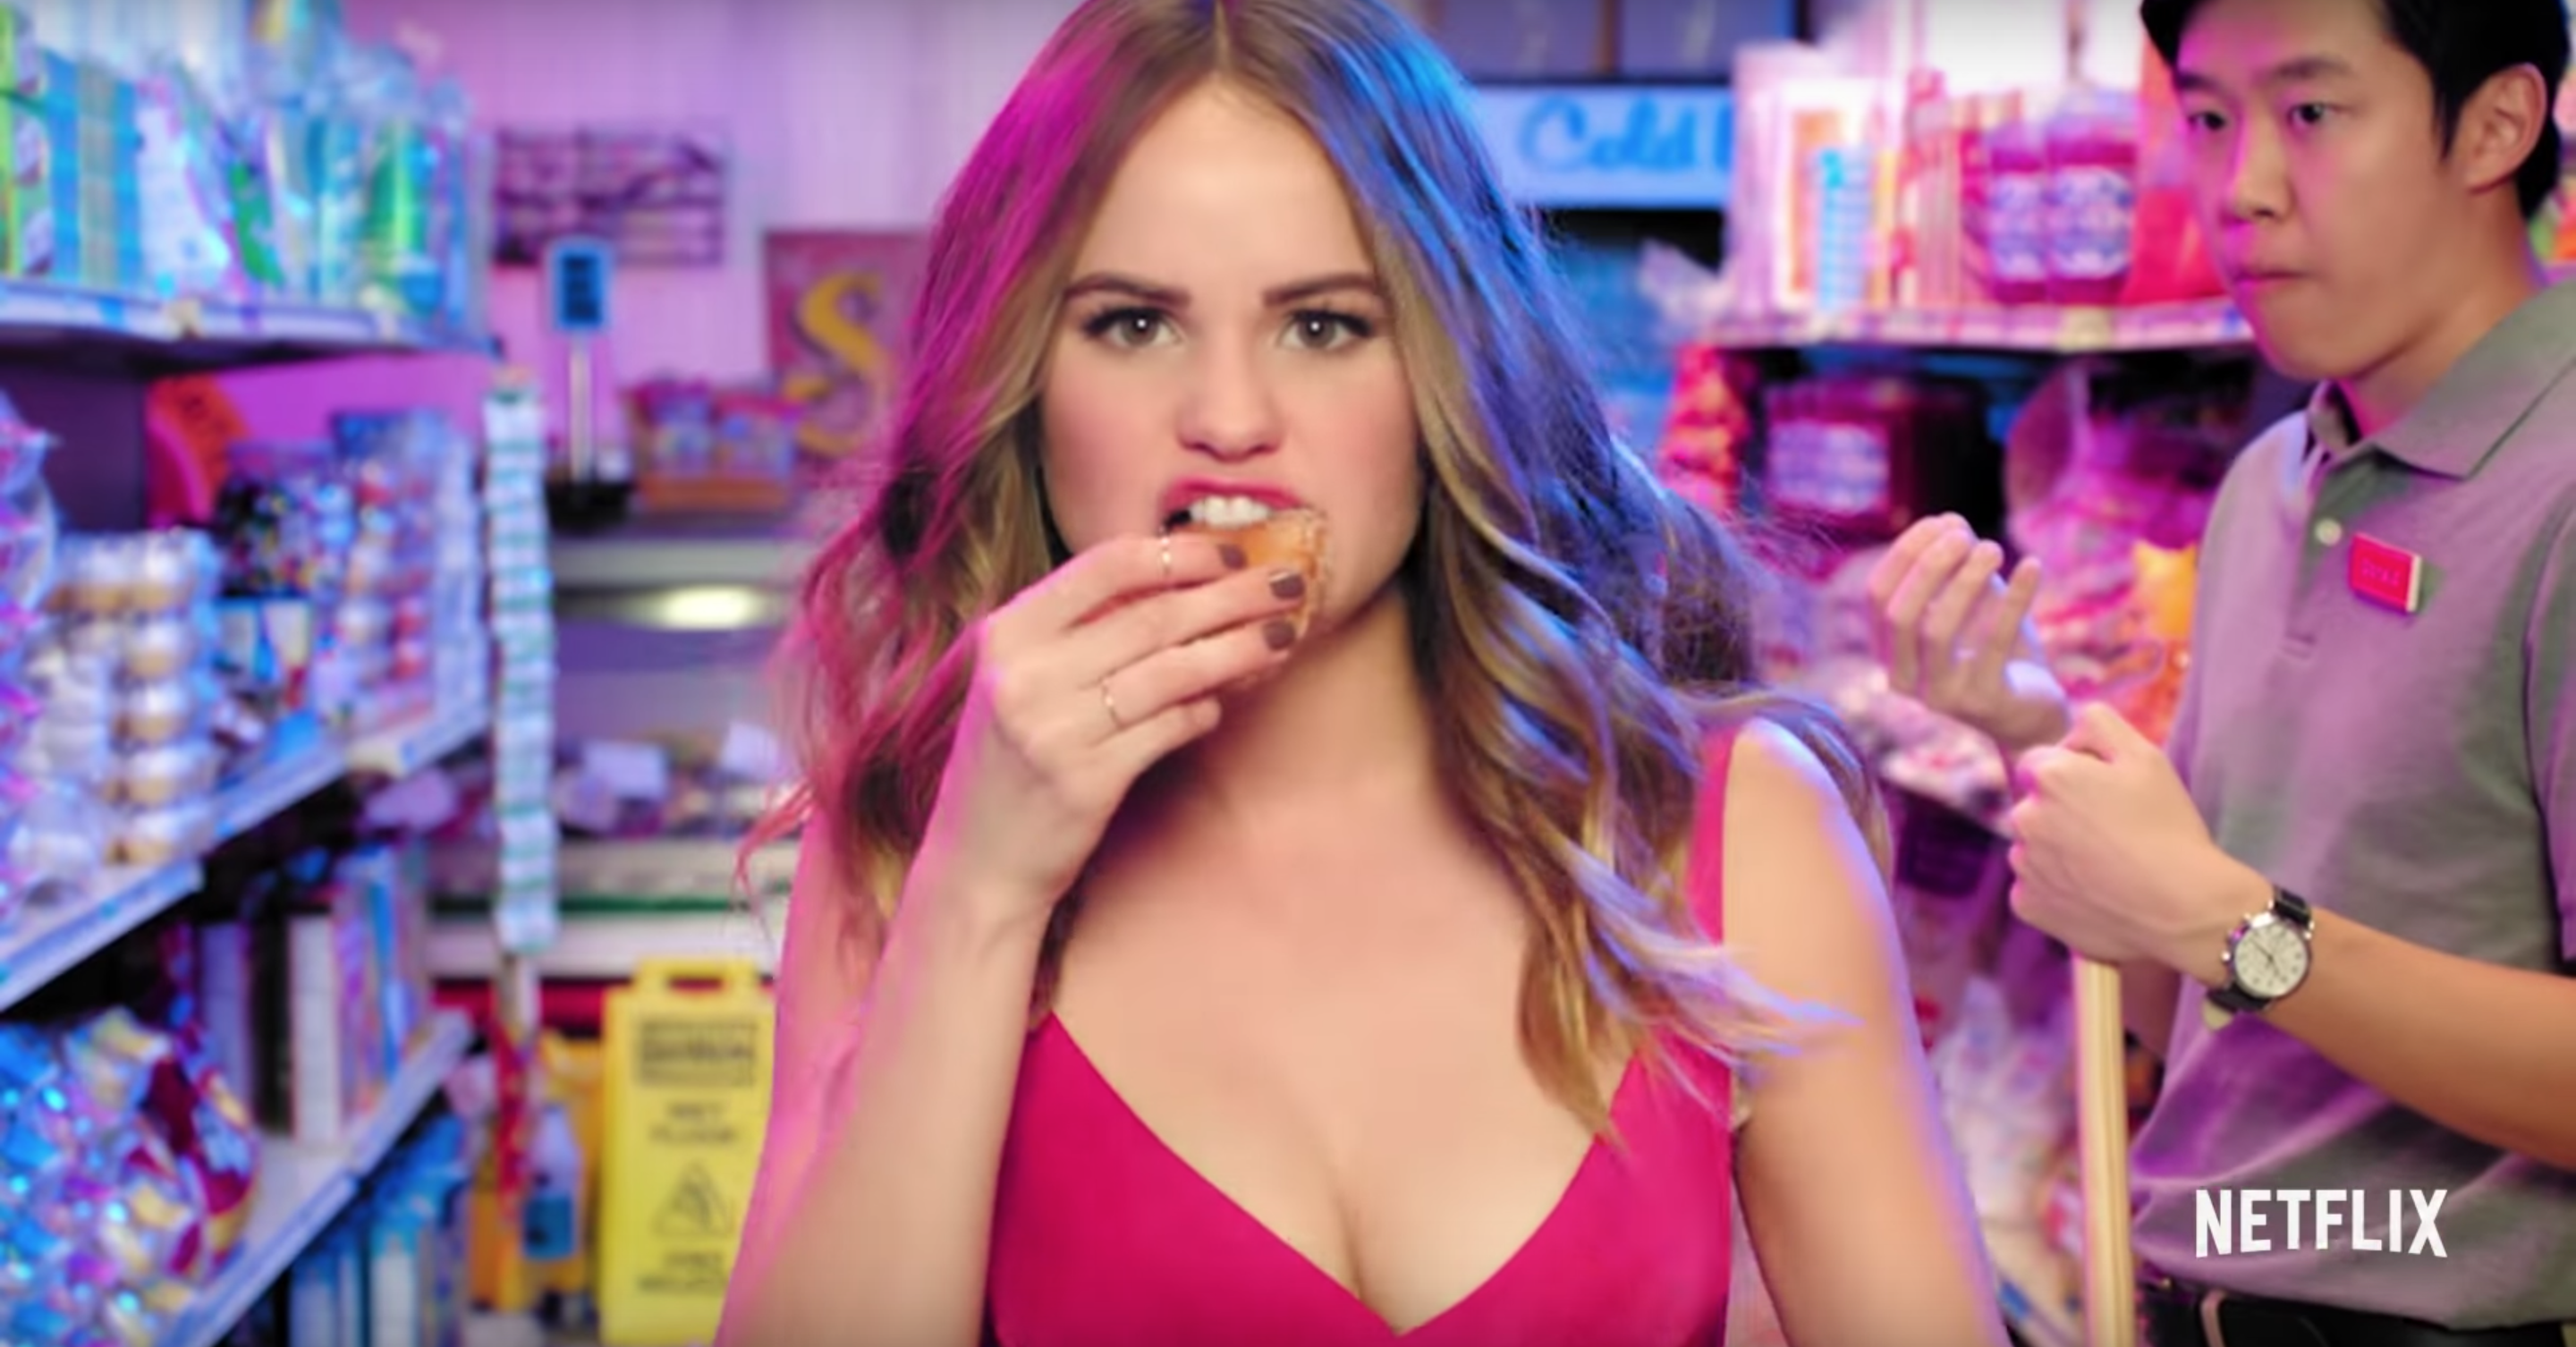 Debby Rayan Porn Porn Captions - Insatiable's Debby Ryan was surprised by criticism of her Netflix series